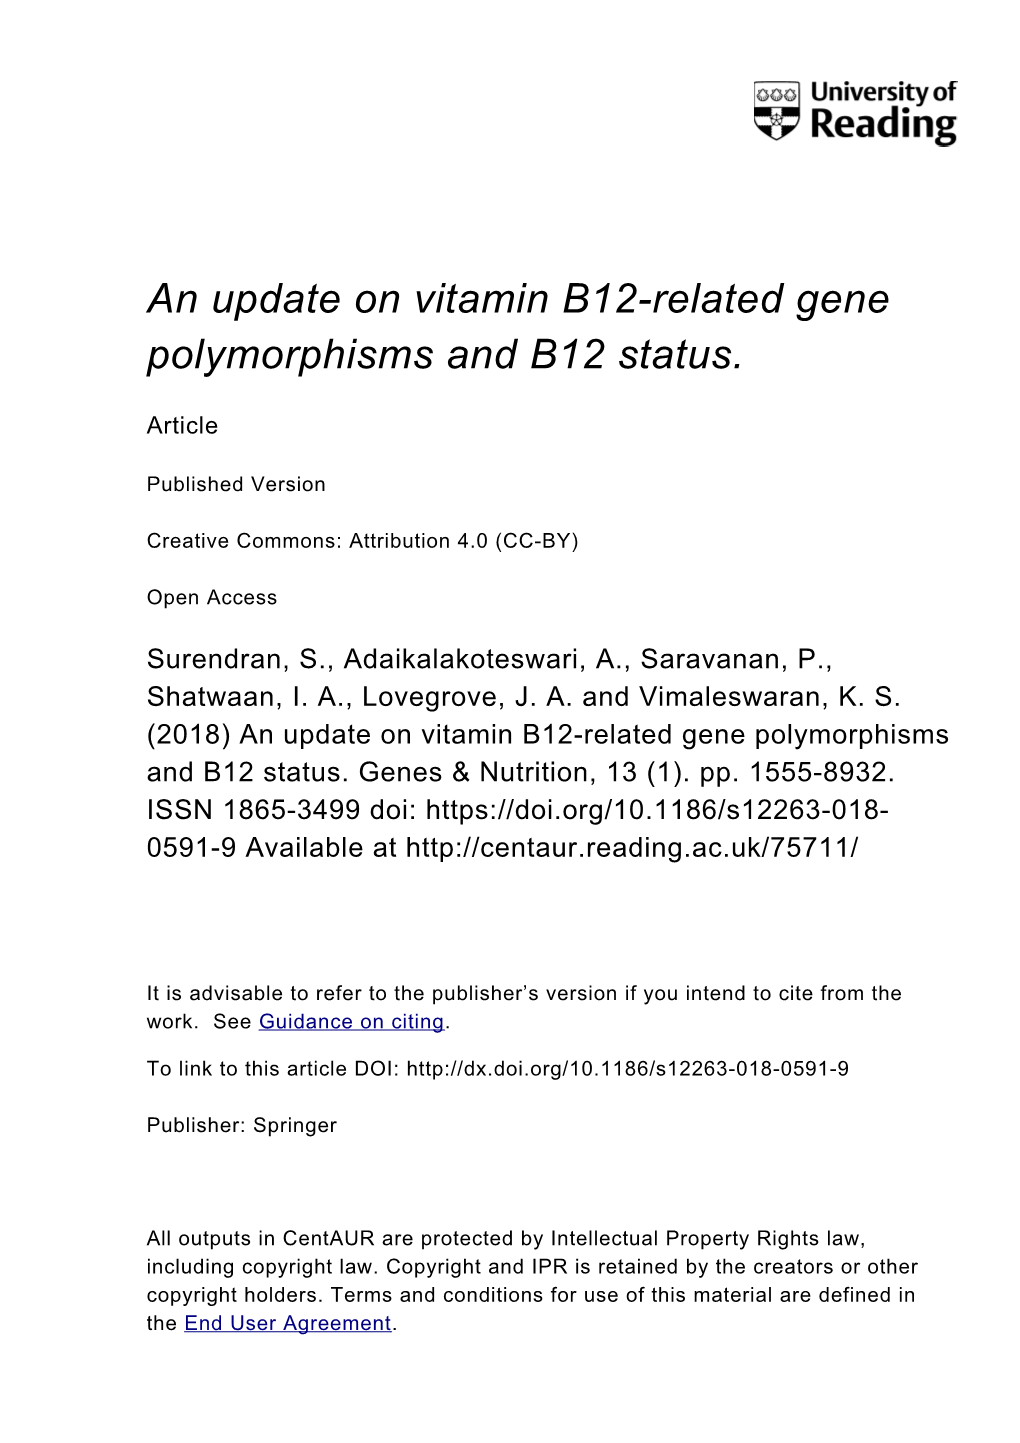 An Update on Vitamin B12-Related Gene Polymorphisms and B12 Status